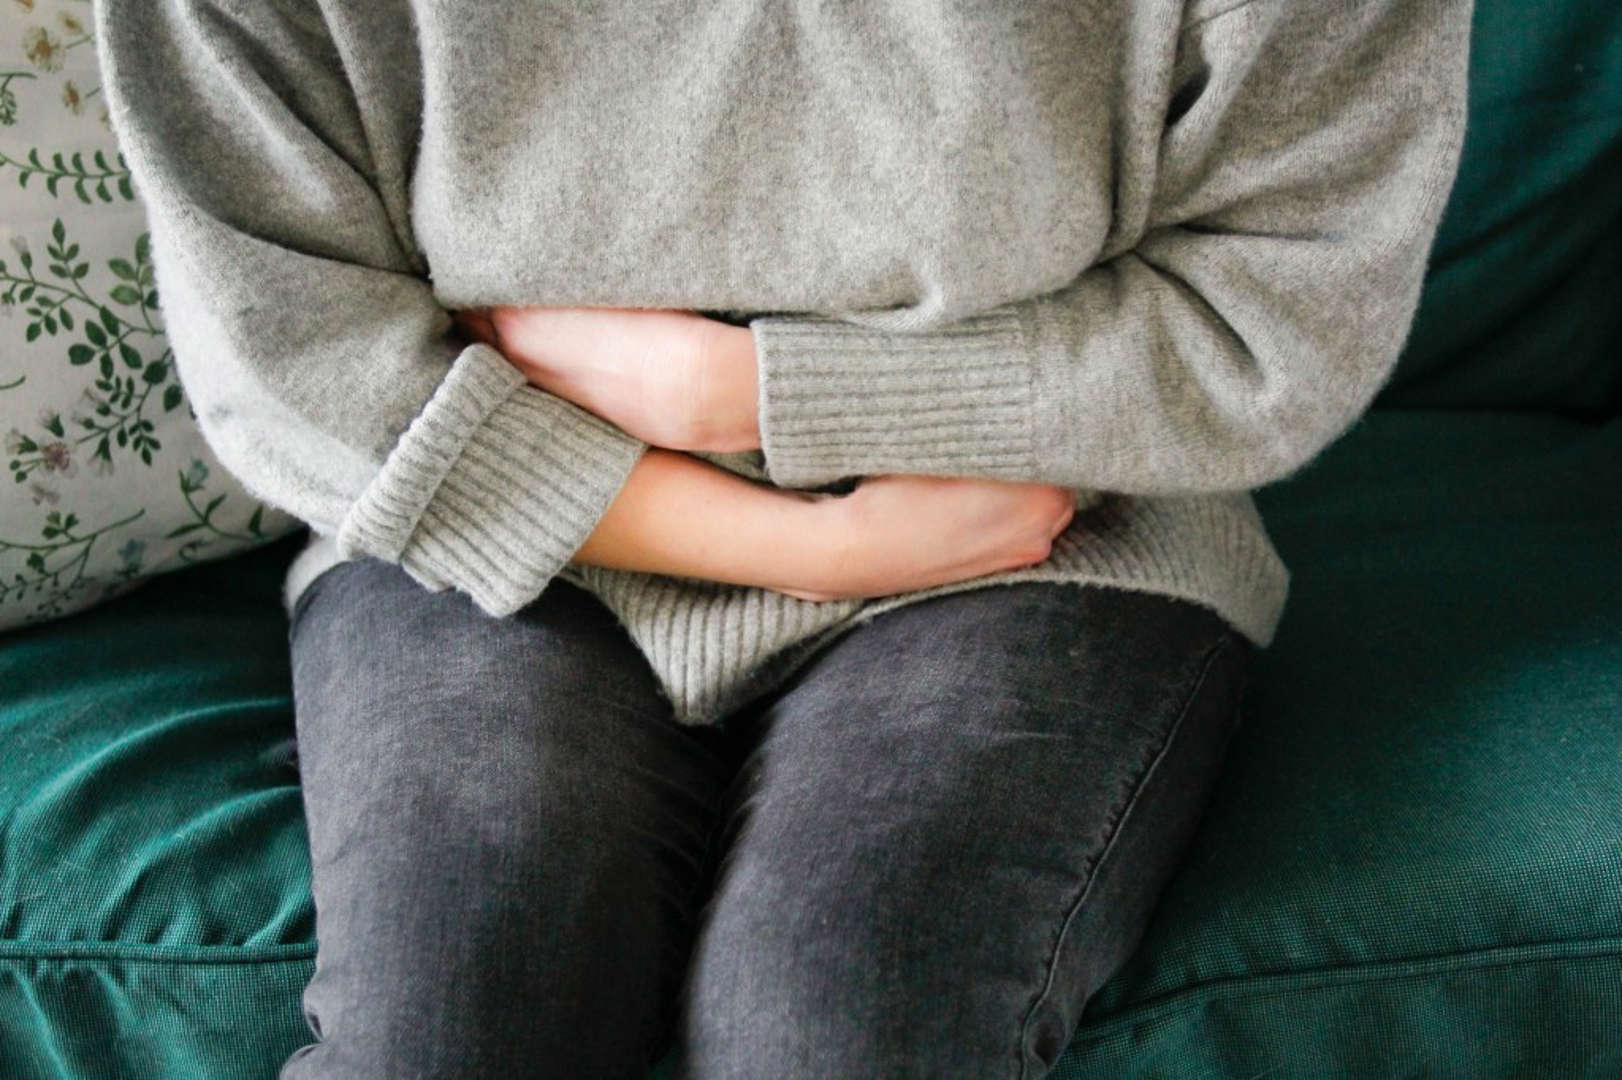 16 signs your body is telling you something is wrong